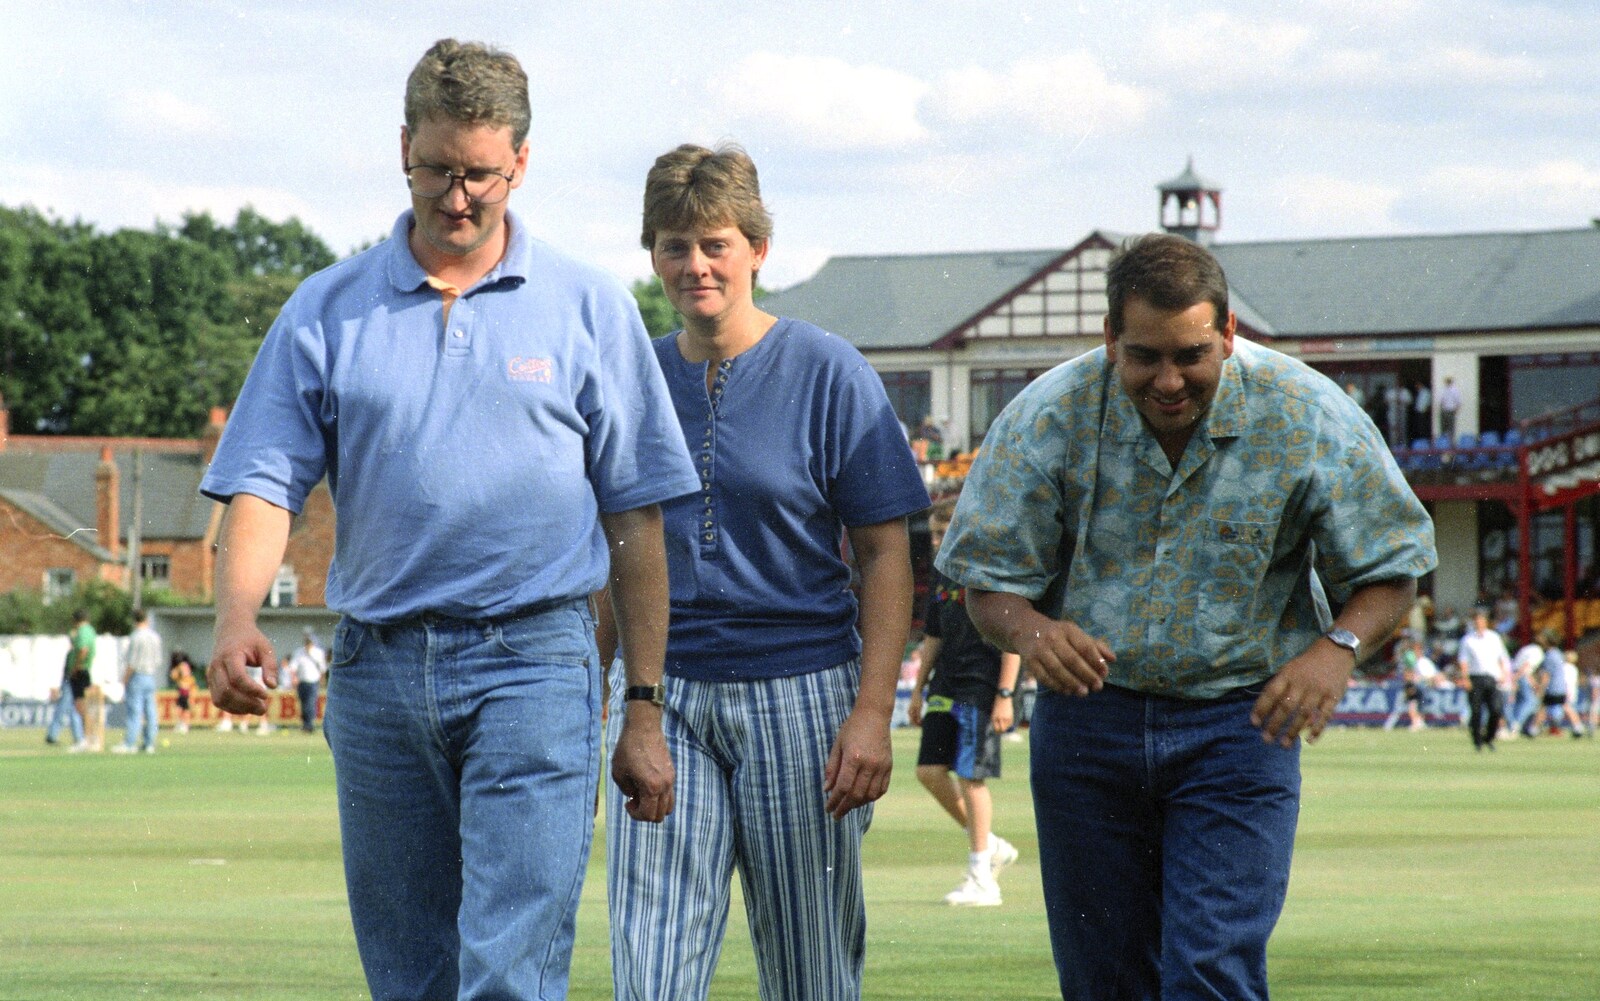 A Spot of Cricket, Northampton - 5th September 1994: Graham, Pippa and Roger